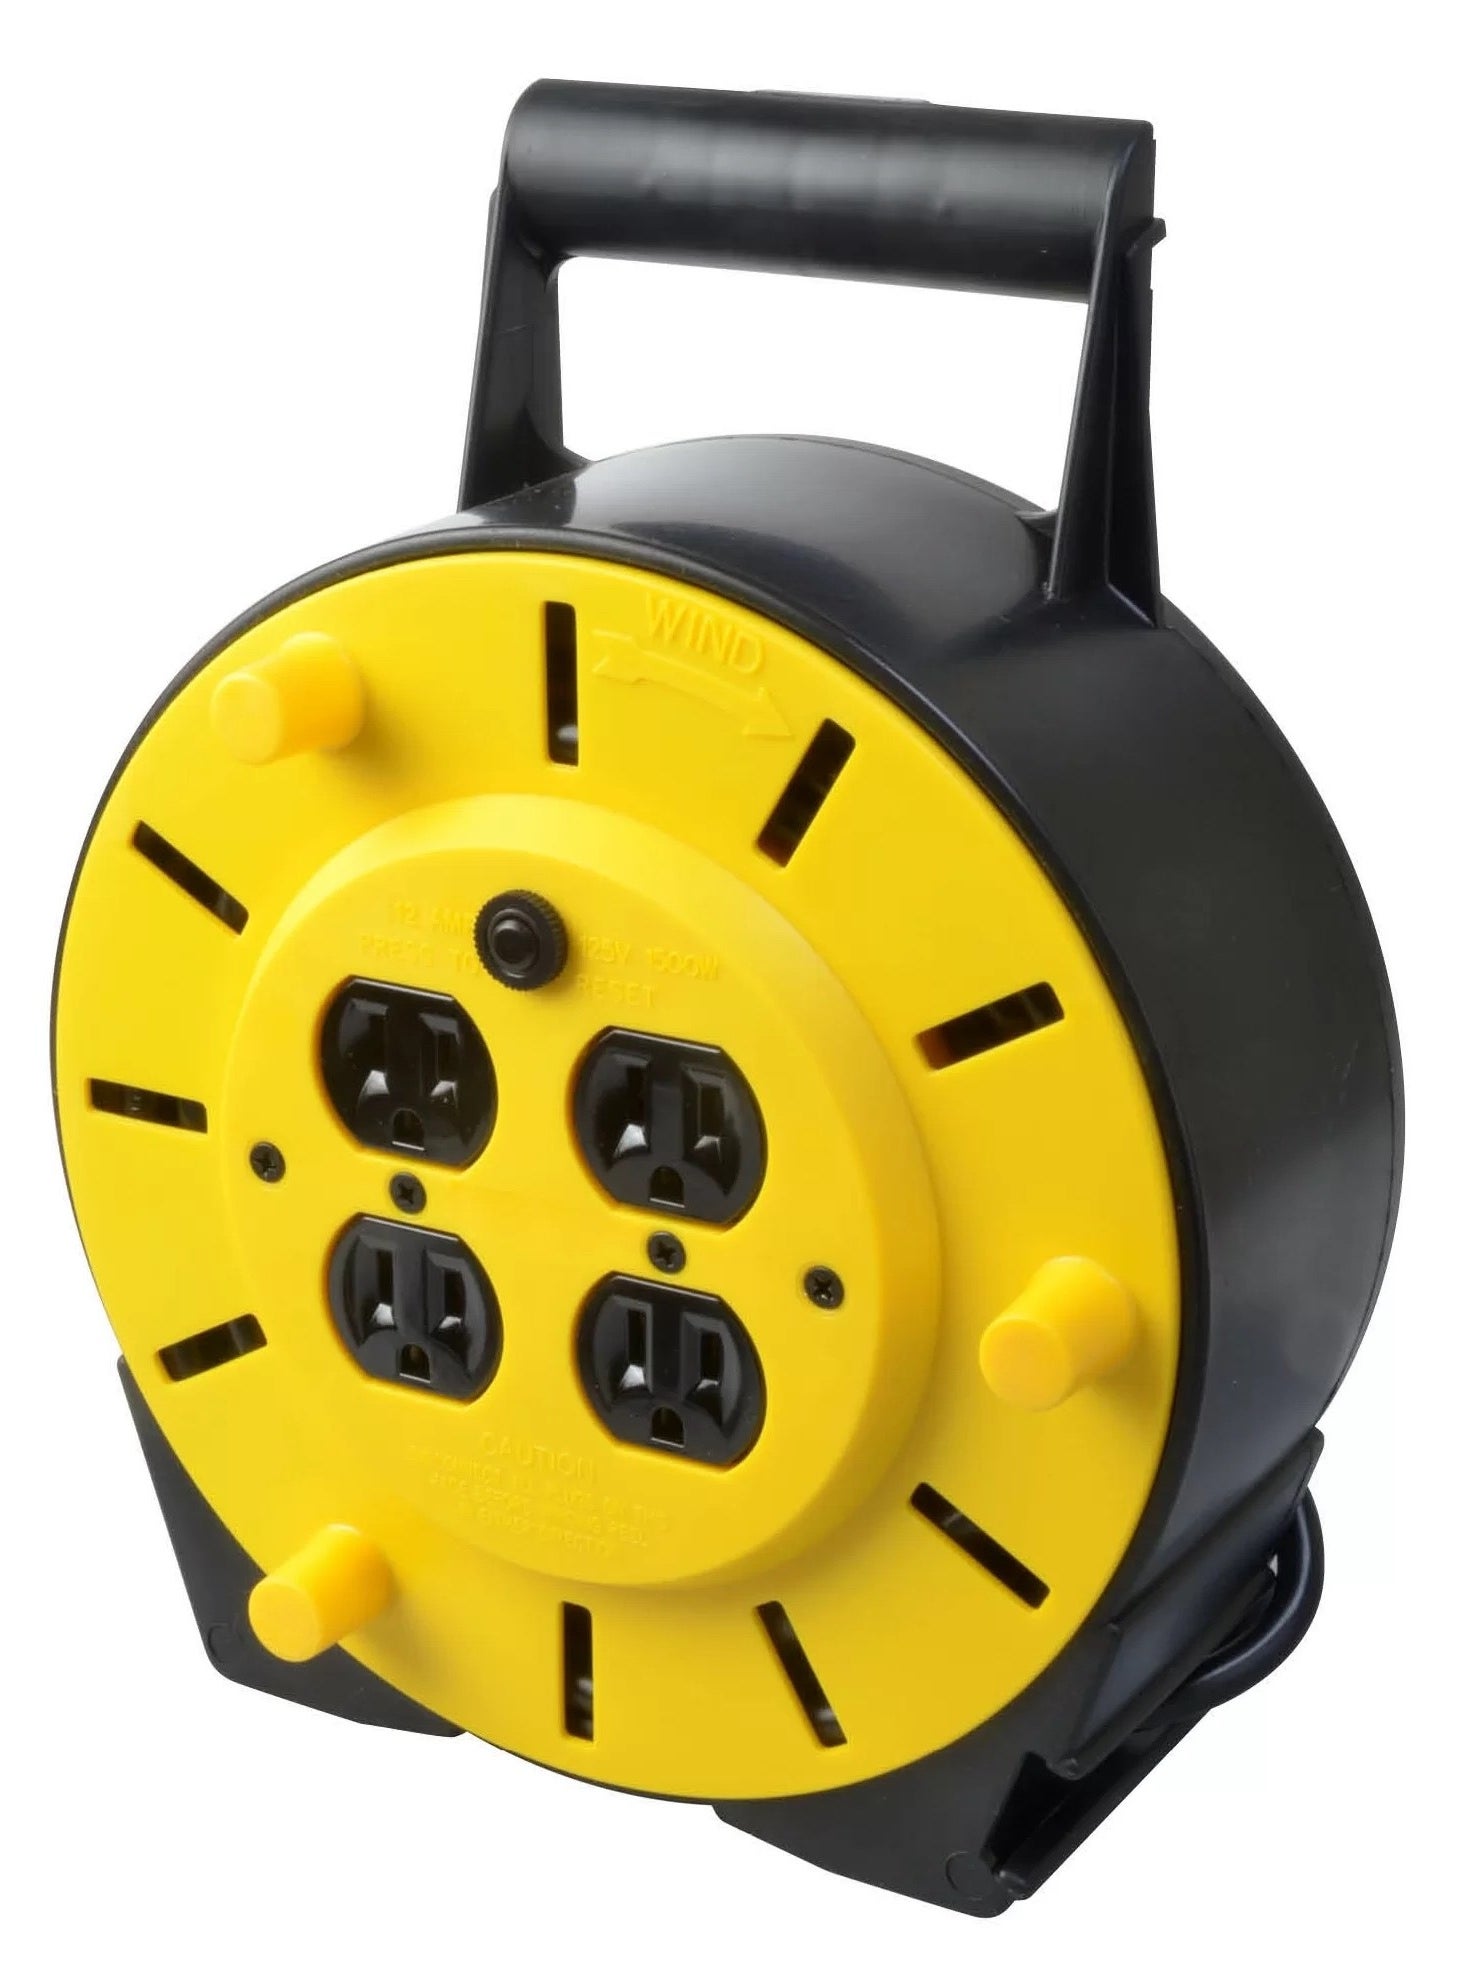 a black and yellow retractable extension cord